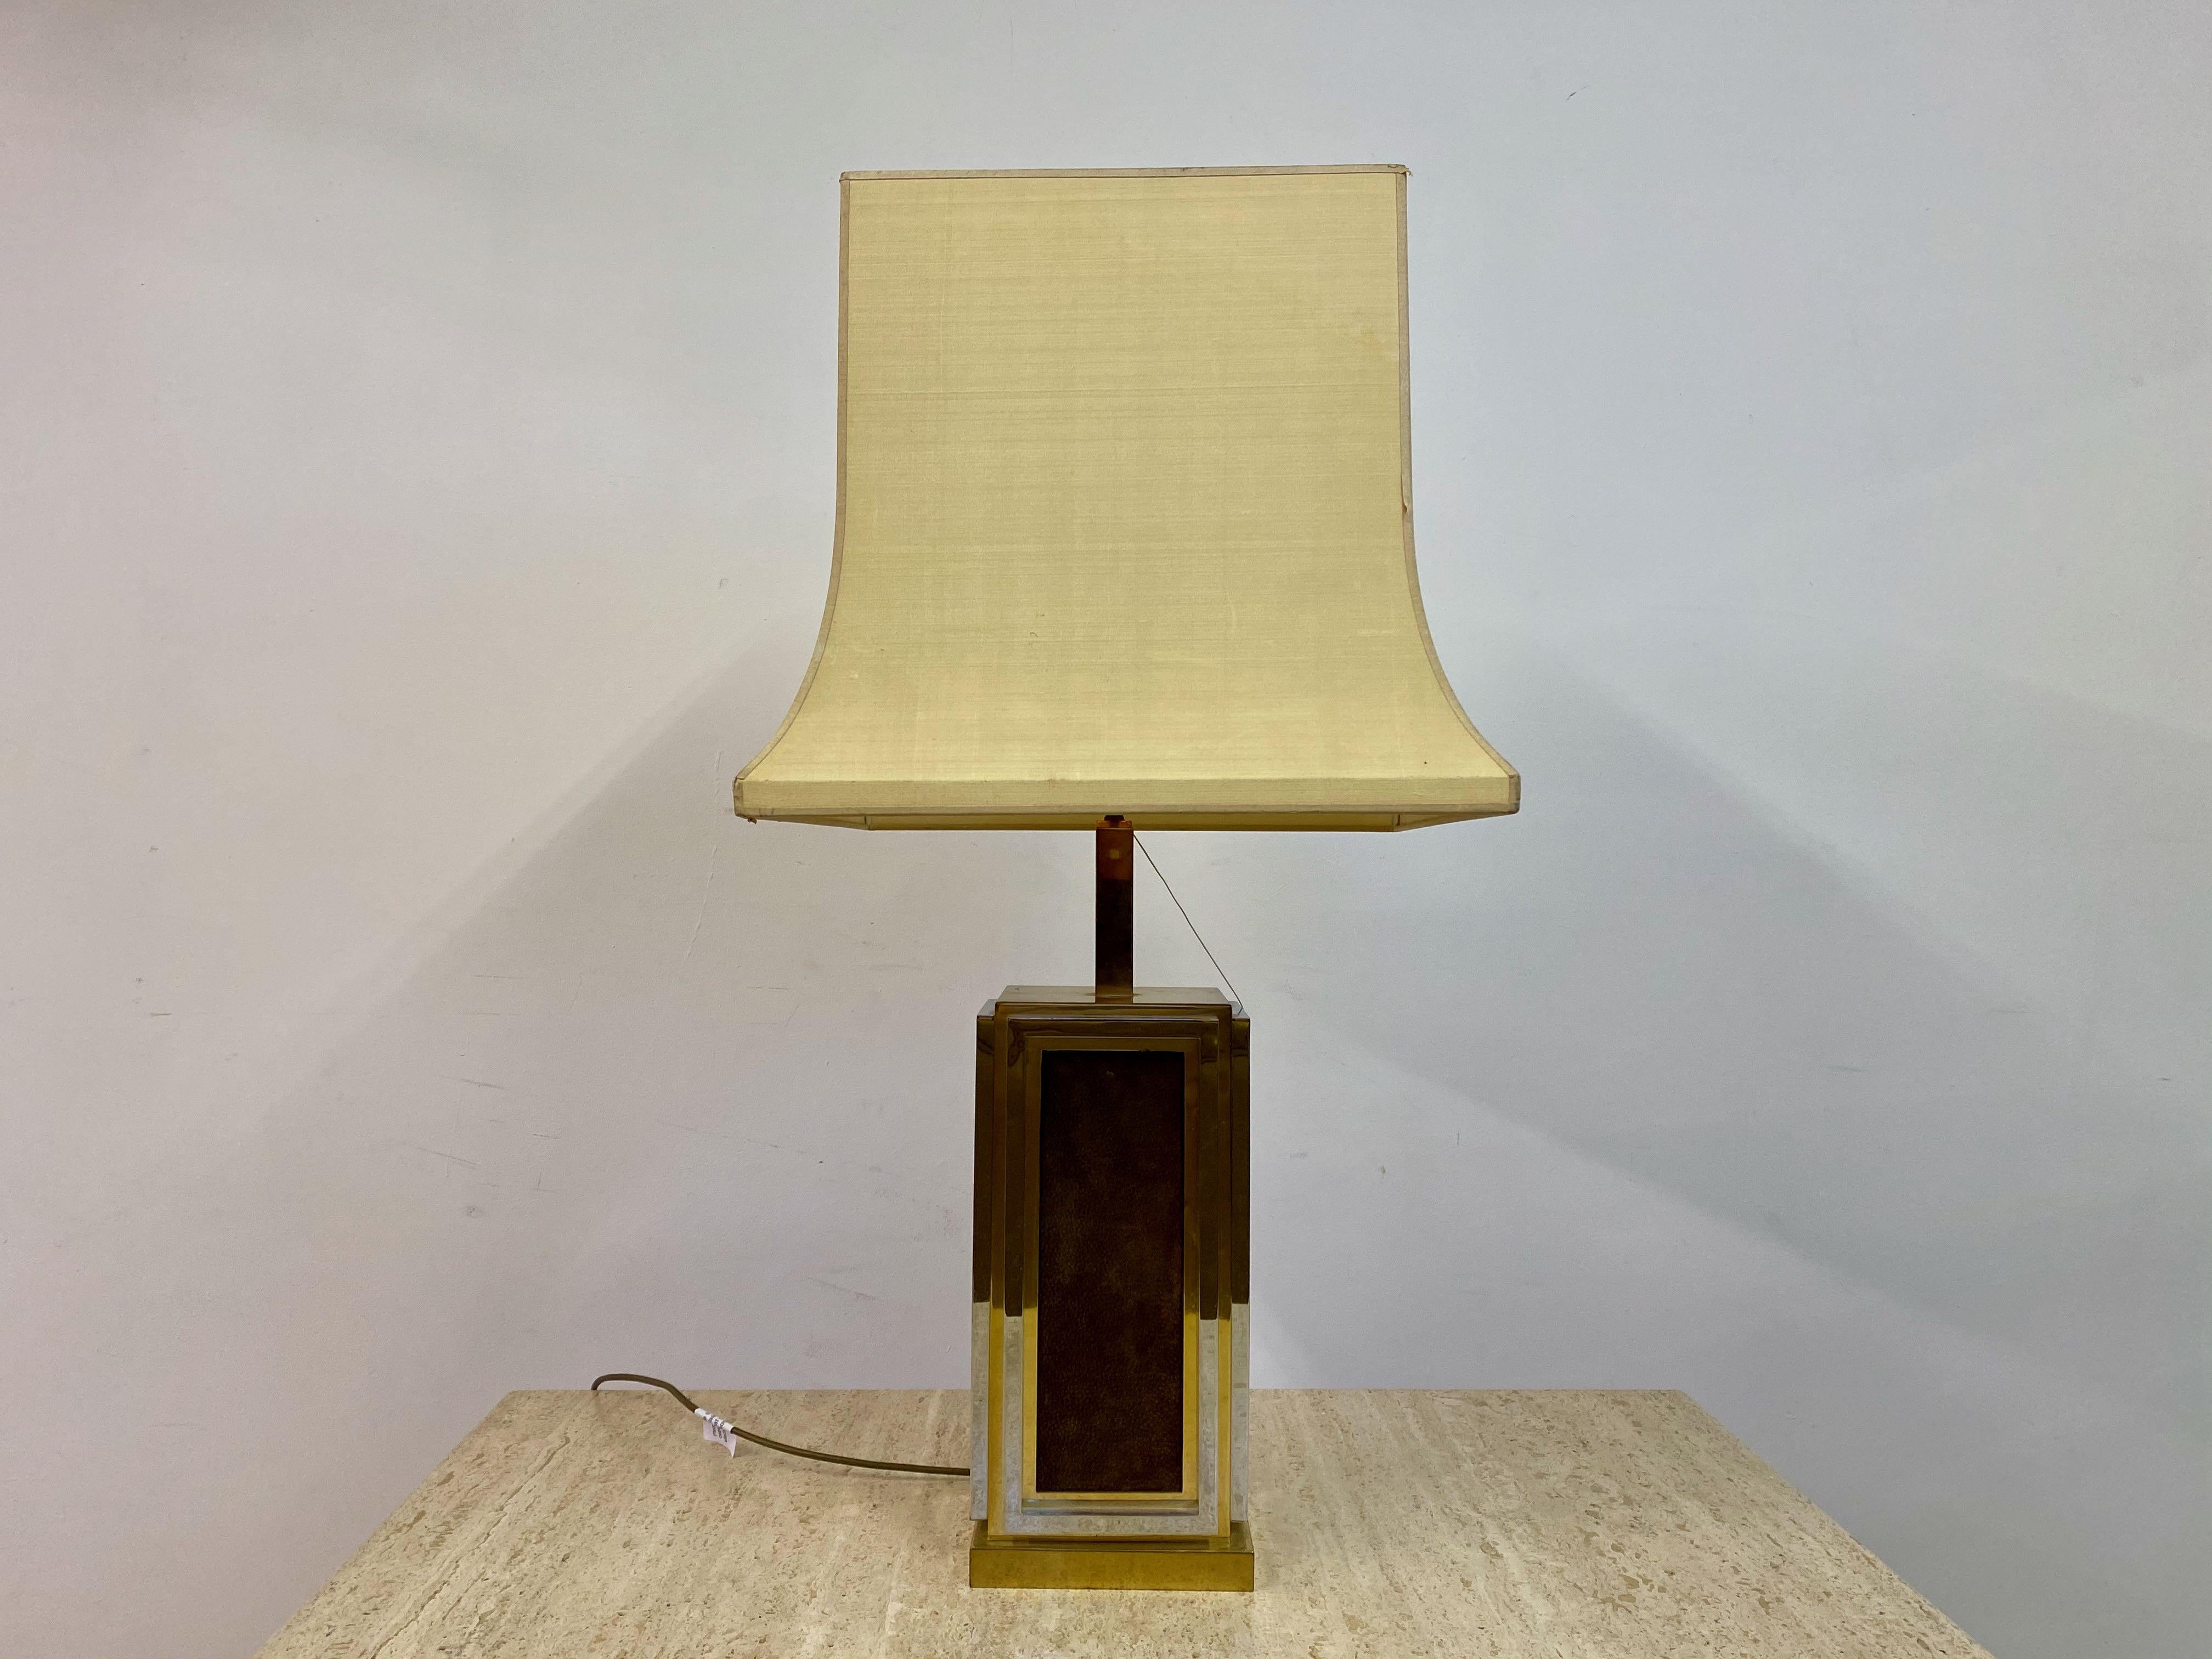 Table lamp 

By Maison Jansen

Brass, chrome and leather

France 1970s

Lamp base measures: 15 x 17 cm.